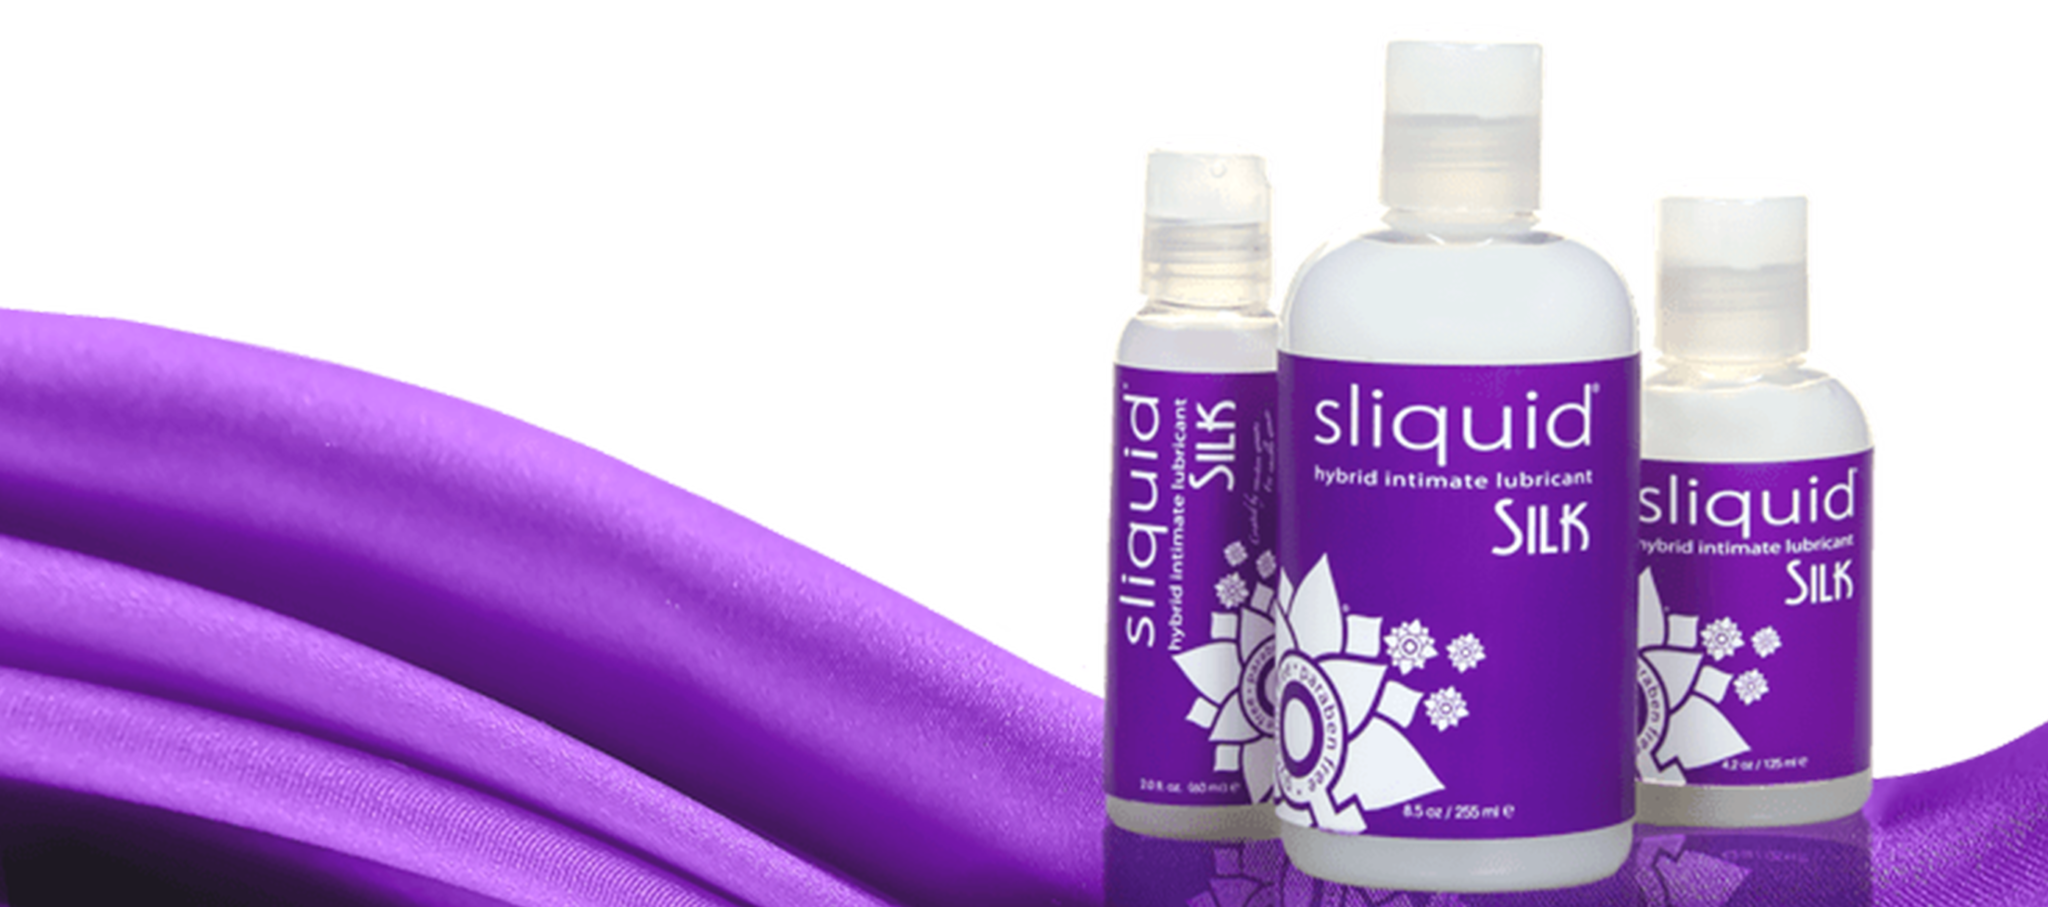 Silk Water Based Silicone Hybrid Personal Lubricant Sliquid Naturals 